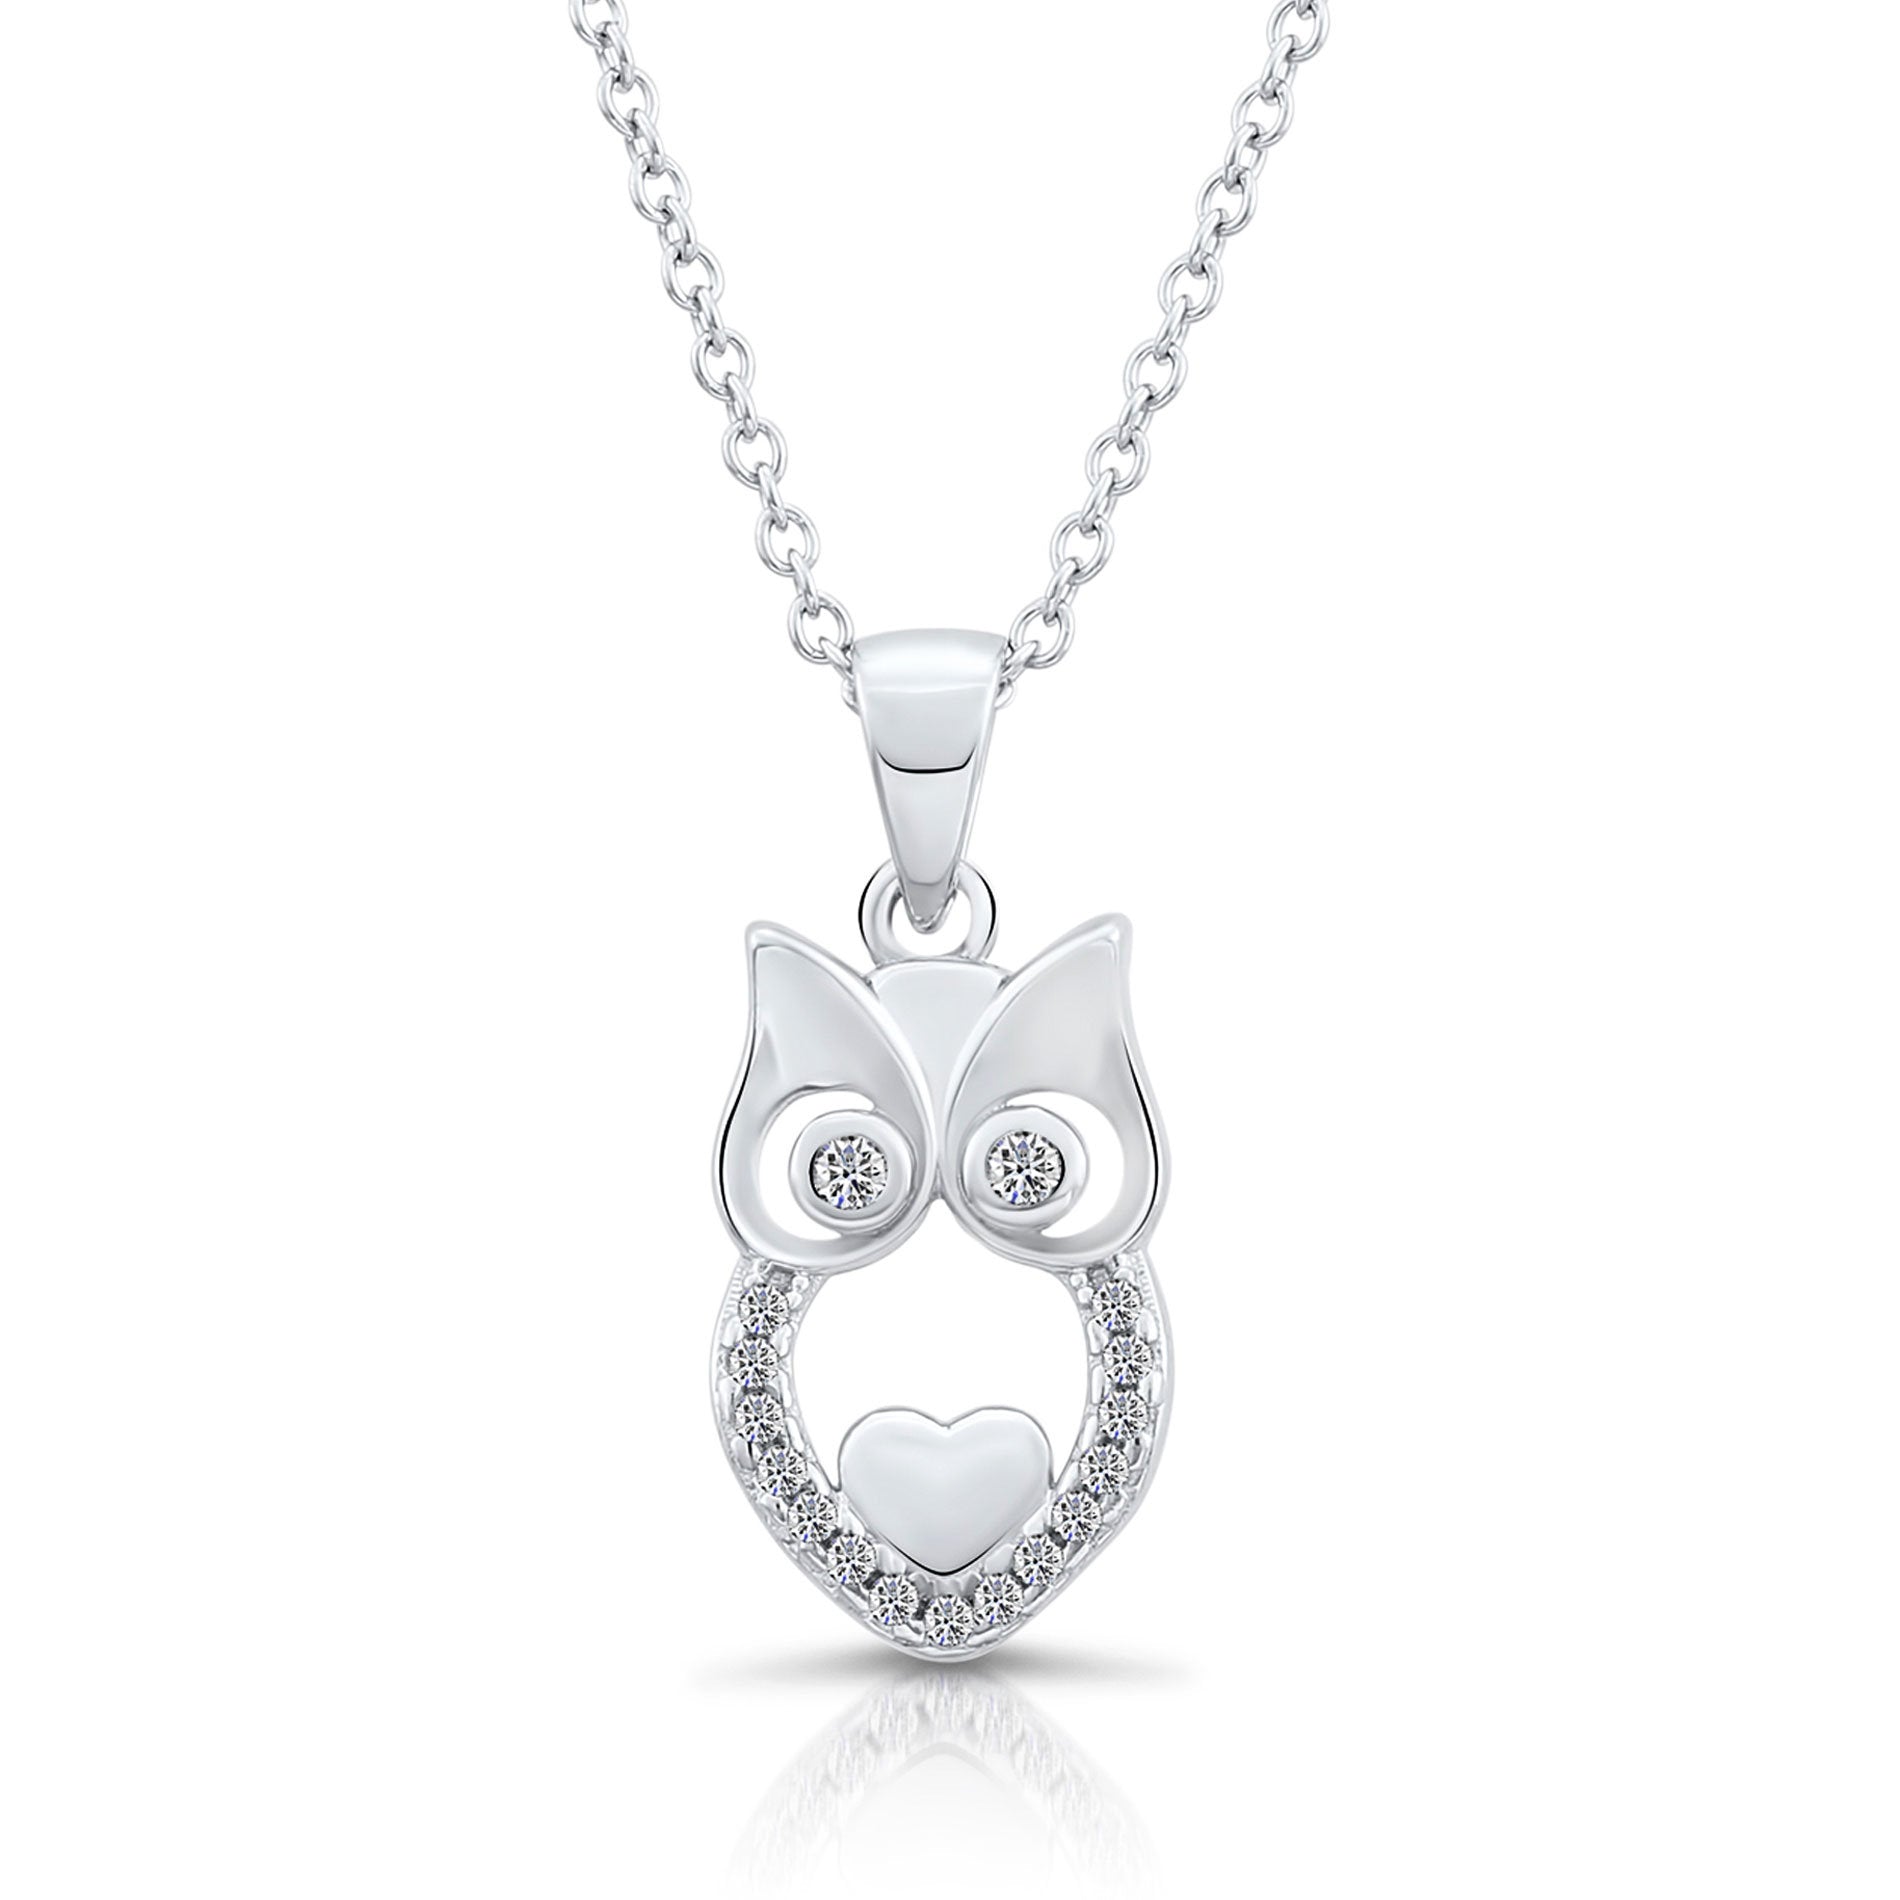 CZ Owl Charm Necklace in Sterling Silver